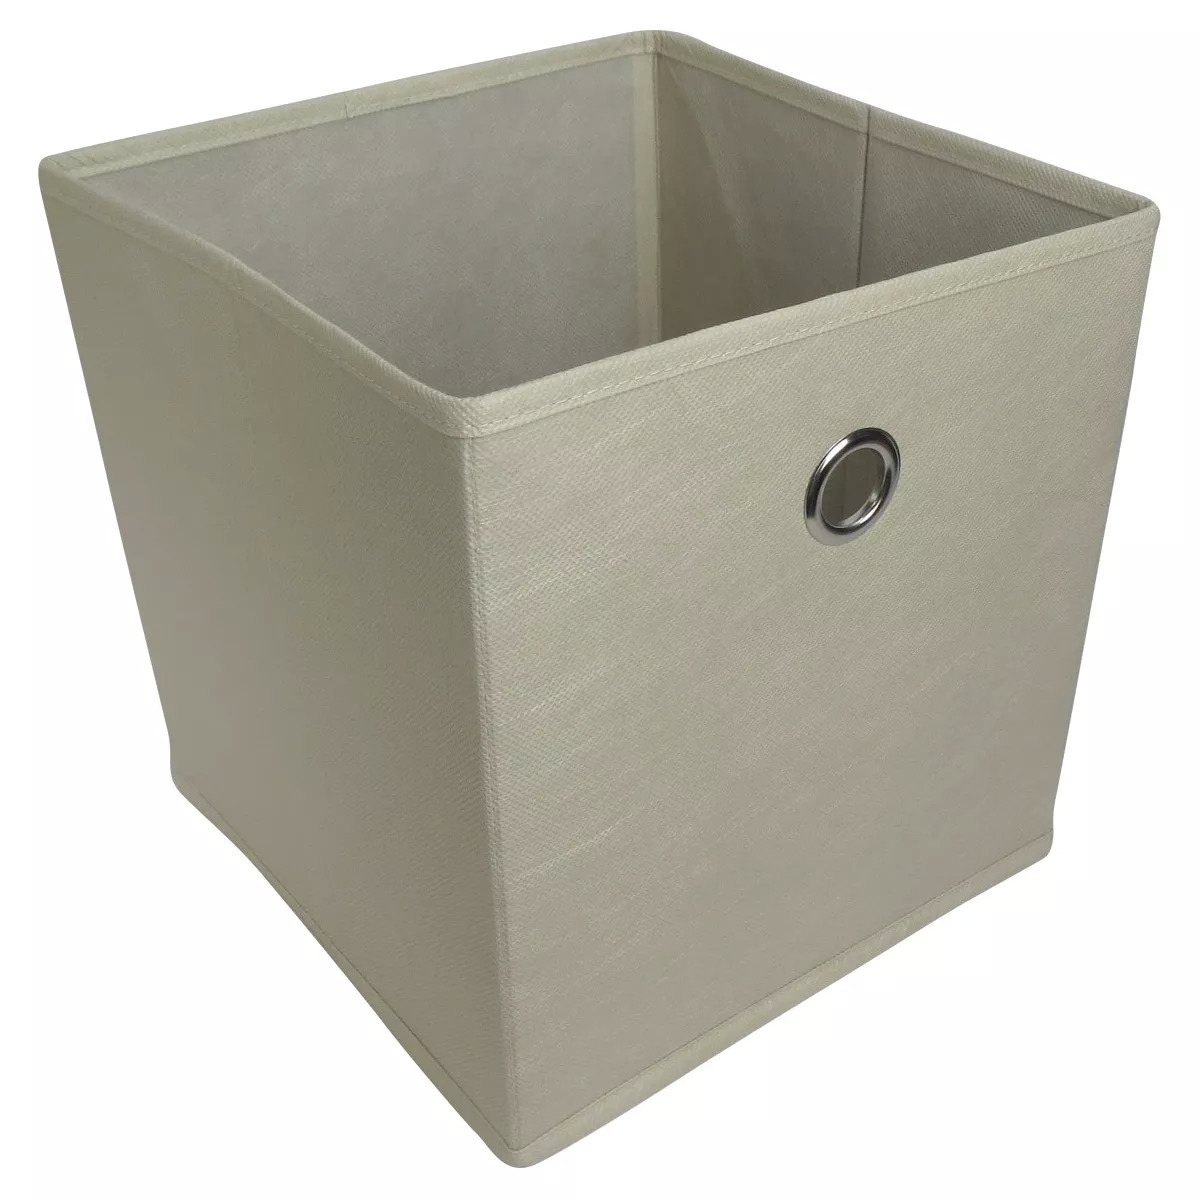 11" Room Essentials Fabric Cube Storage Bin (Various) $4 + Free Store Pickup at Target or Free Shipping on $35+